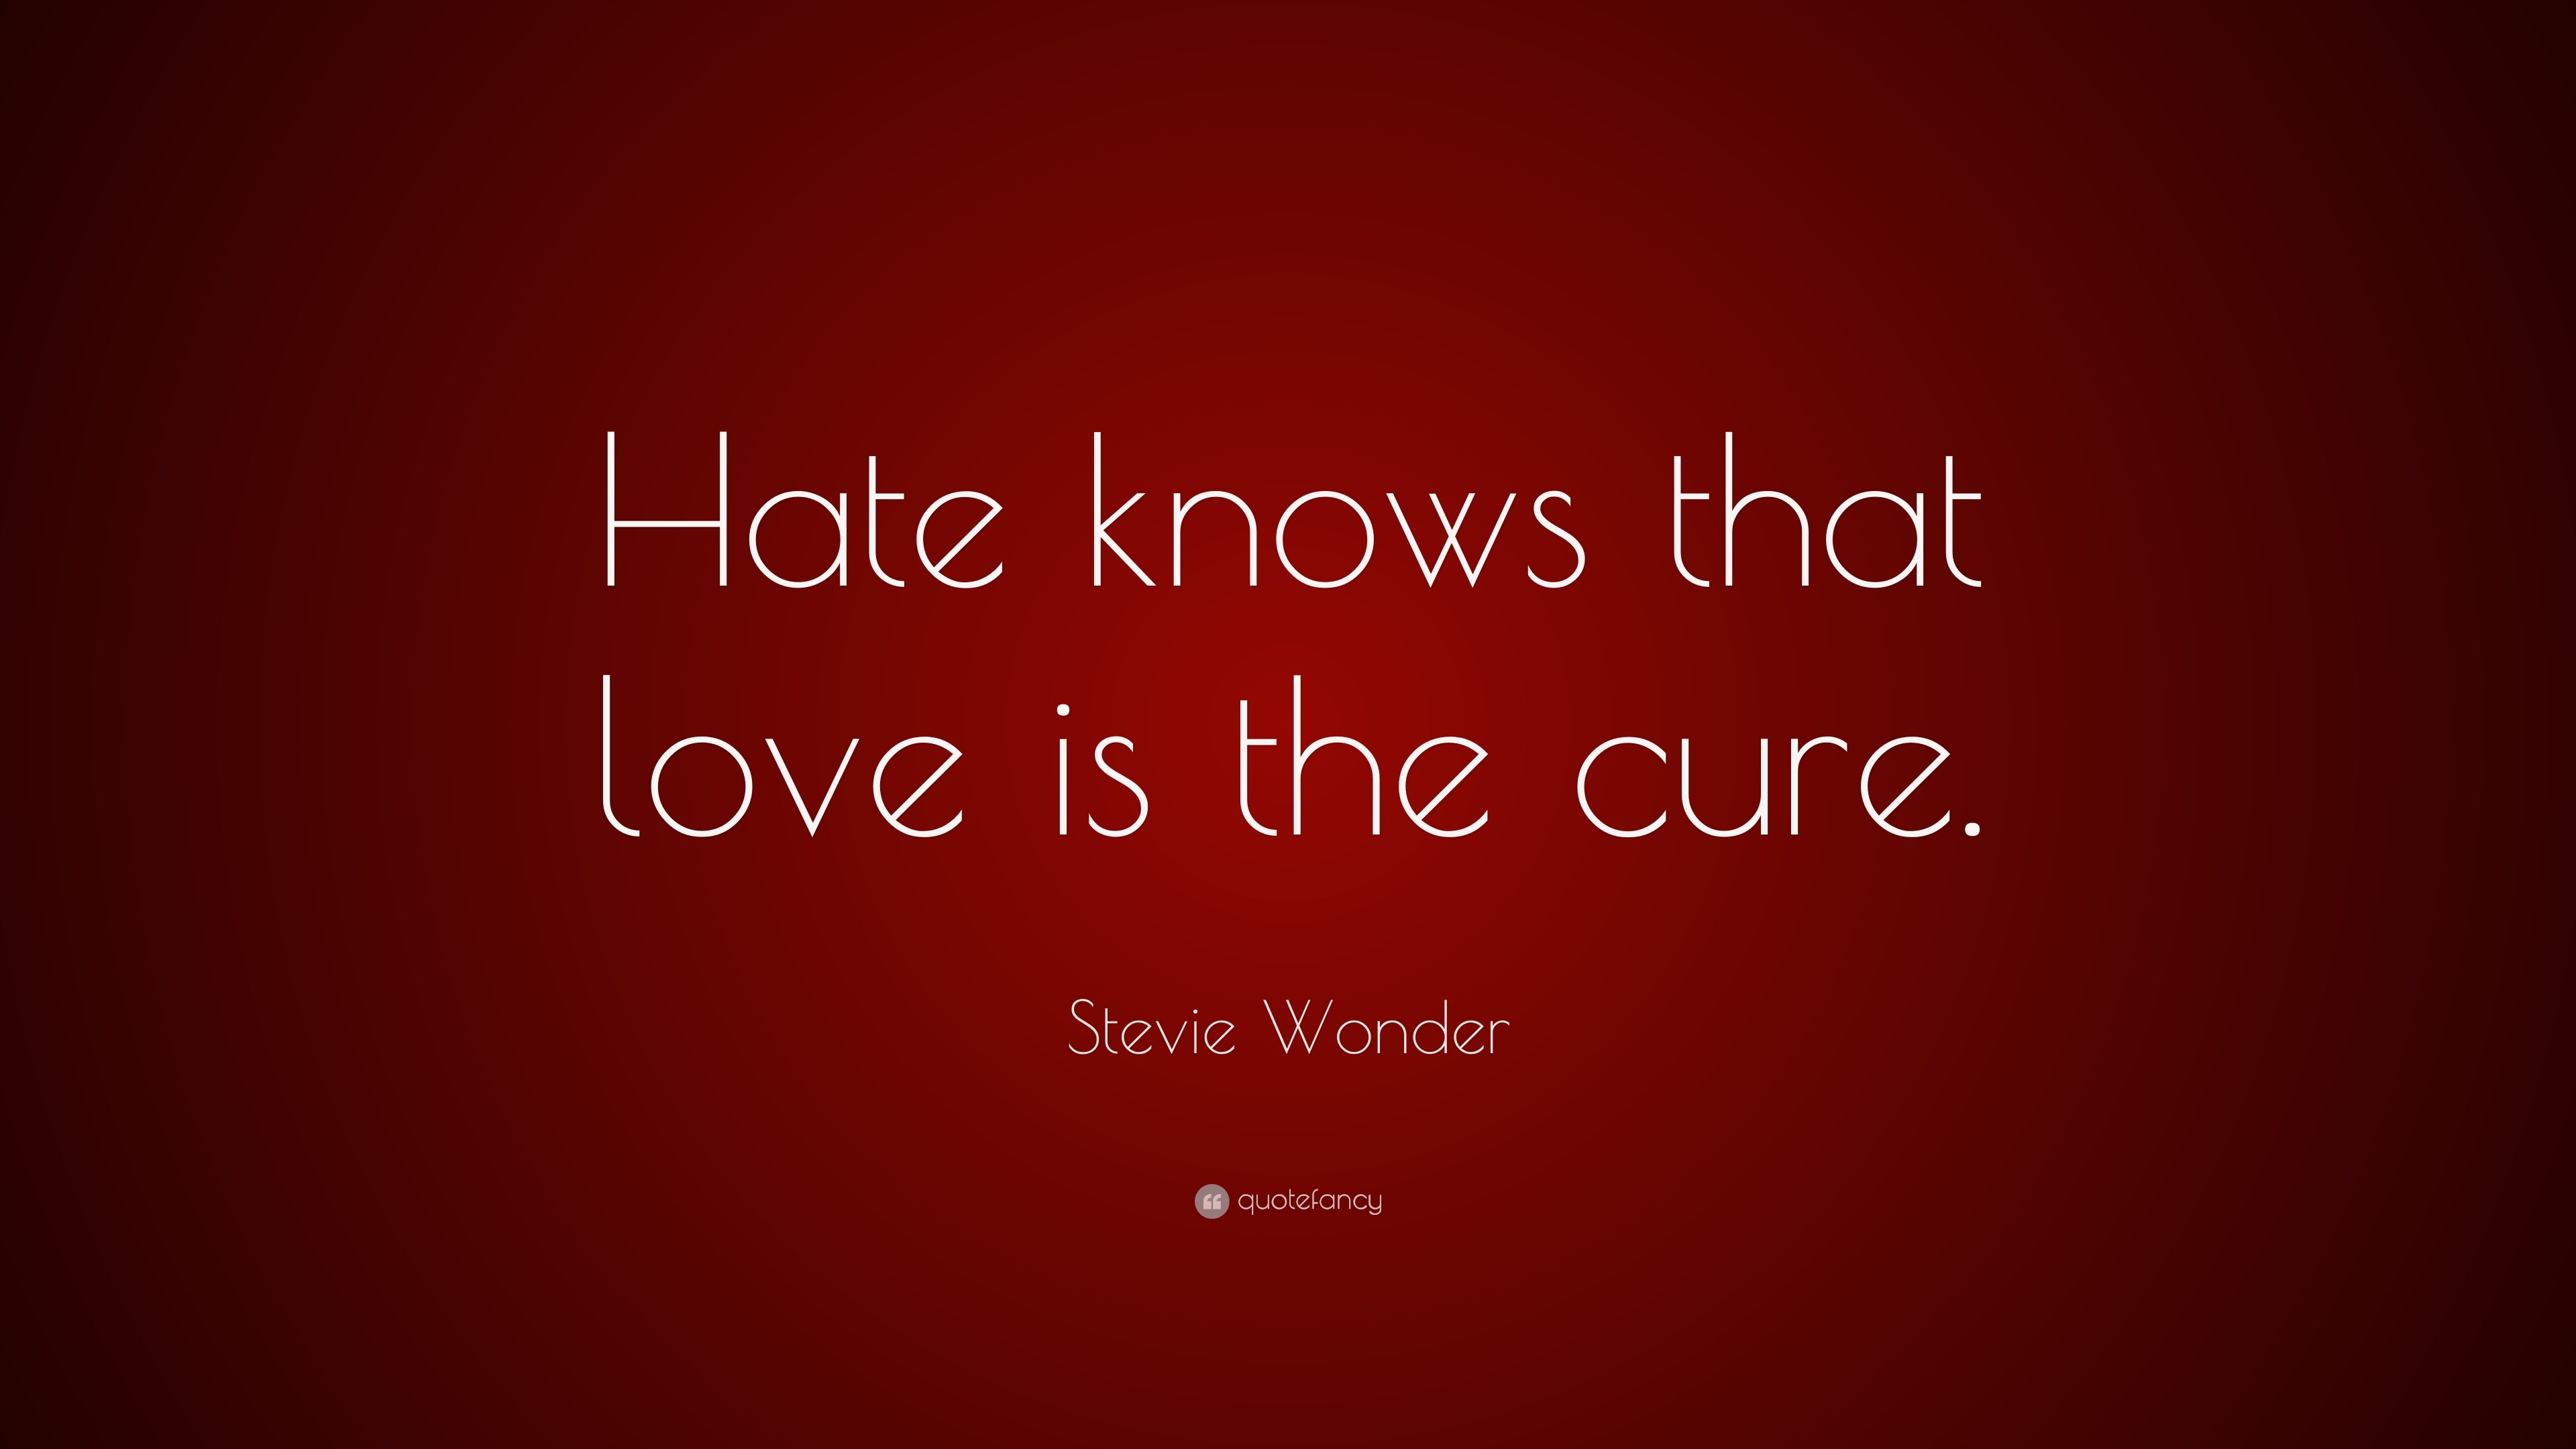 3840x2160 Stevie Wonder Quote: “Hate knows that love is the cure.”